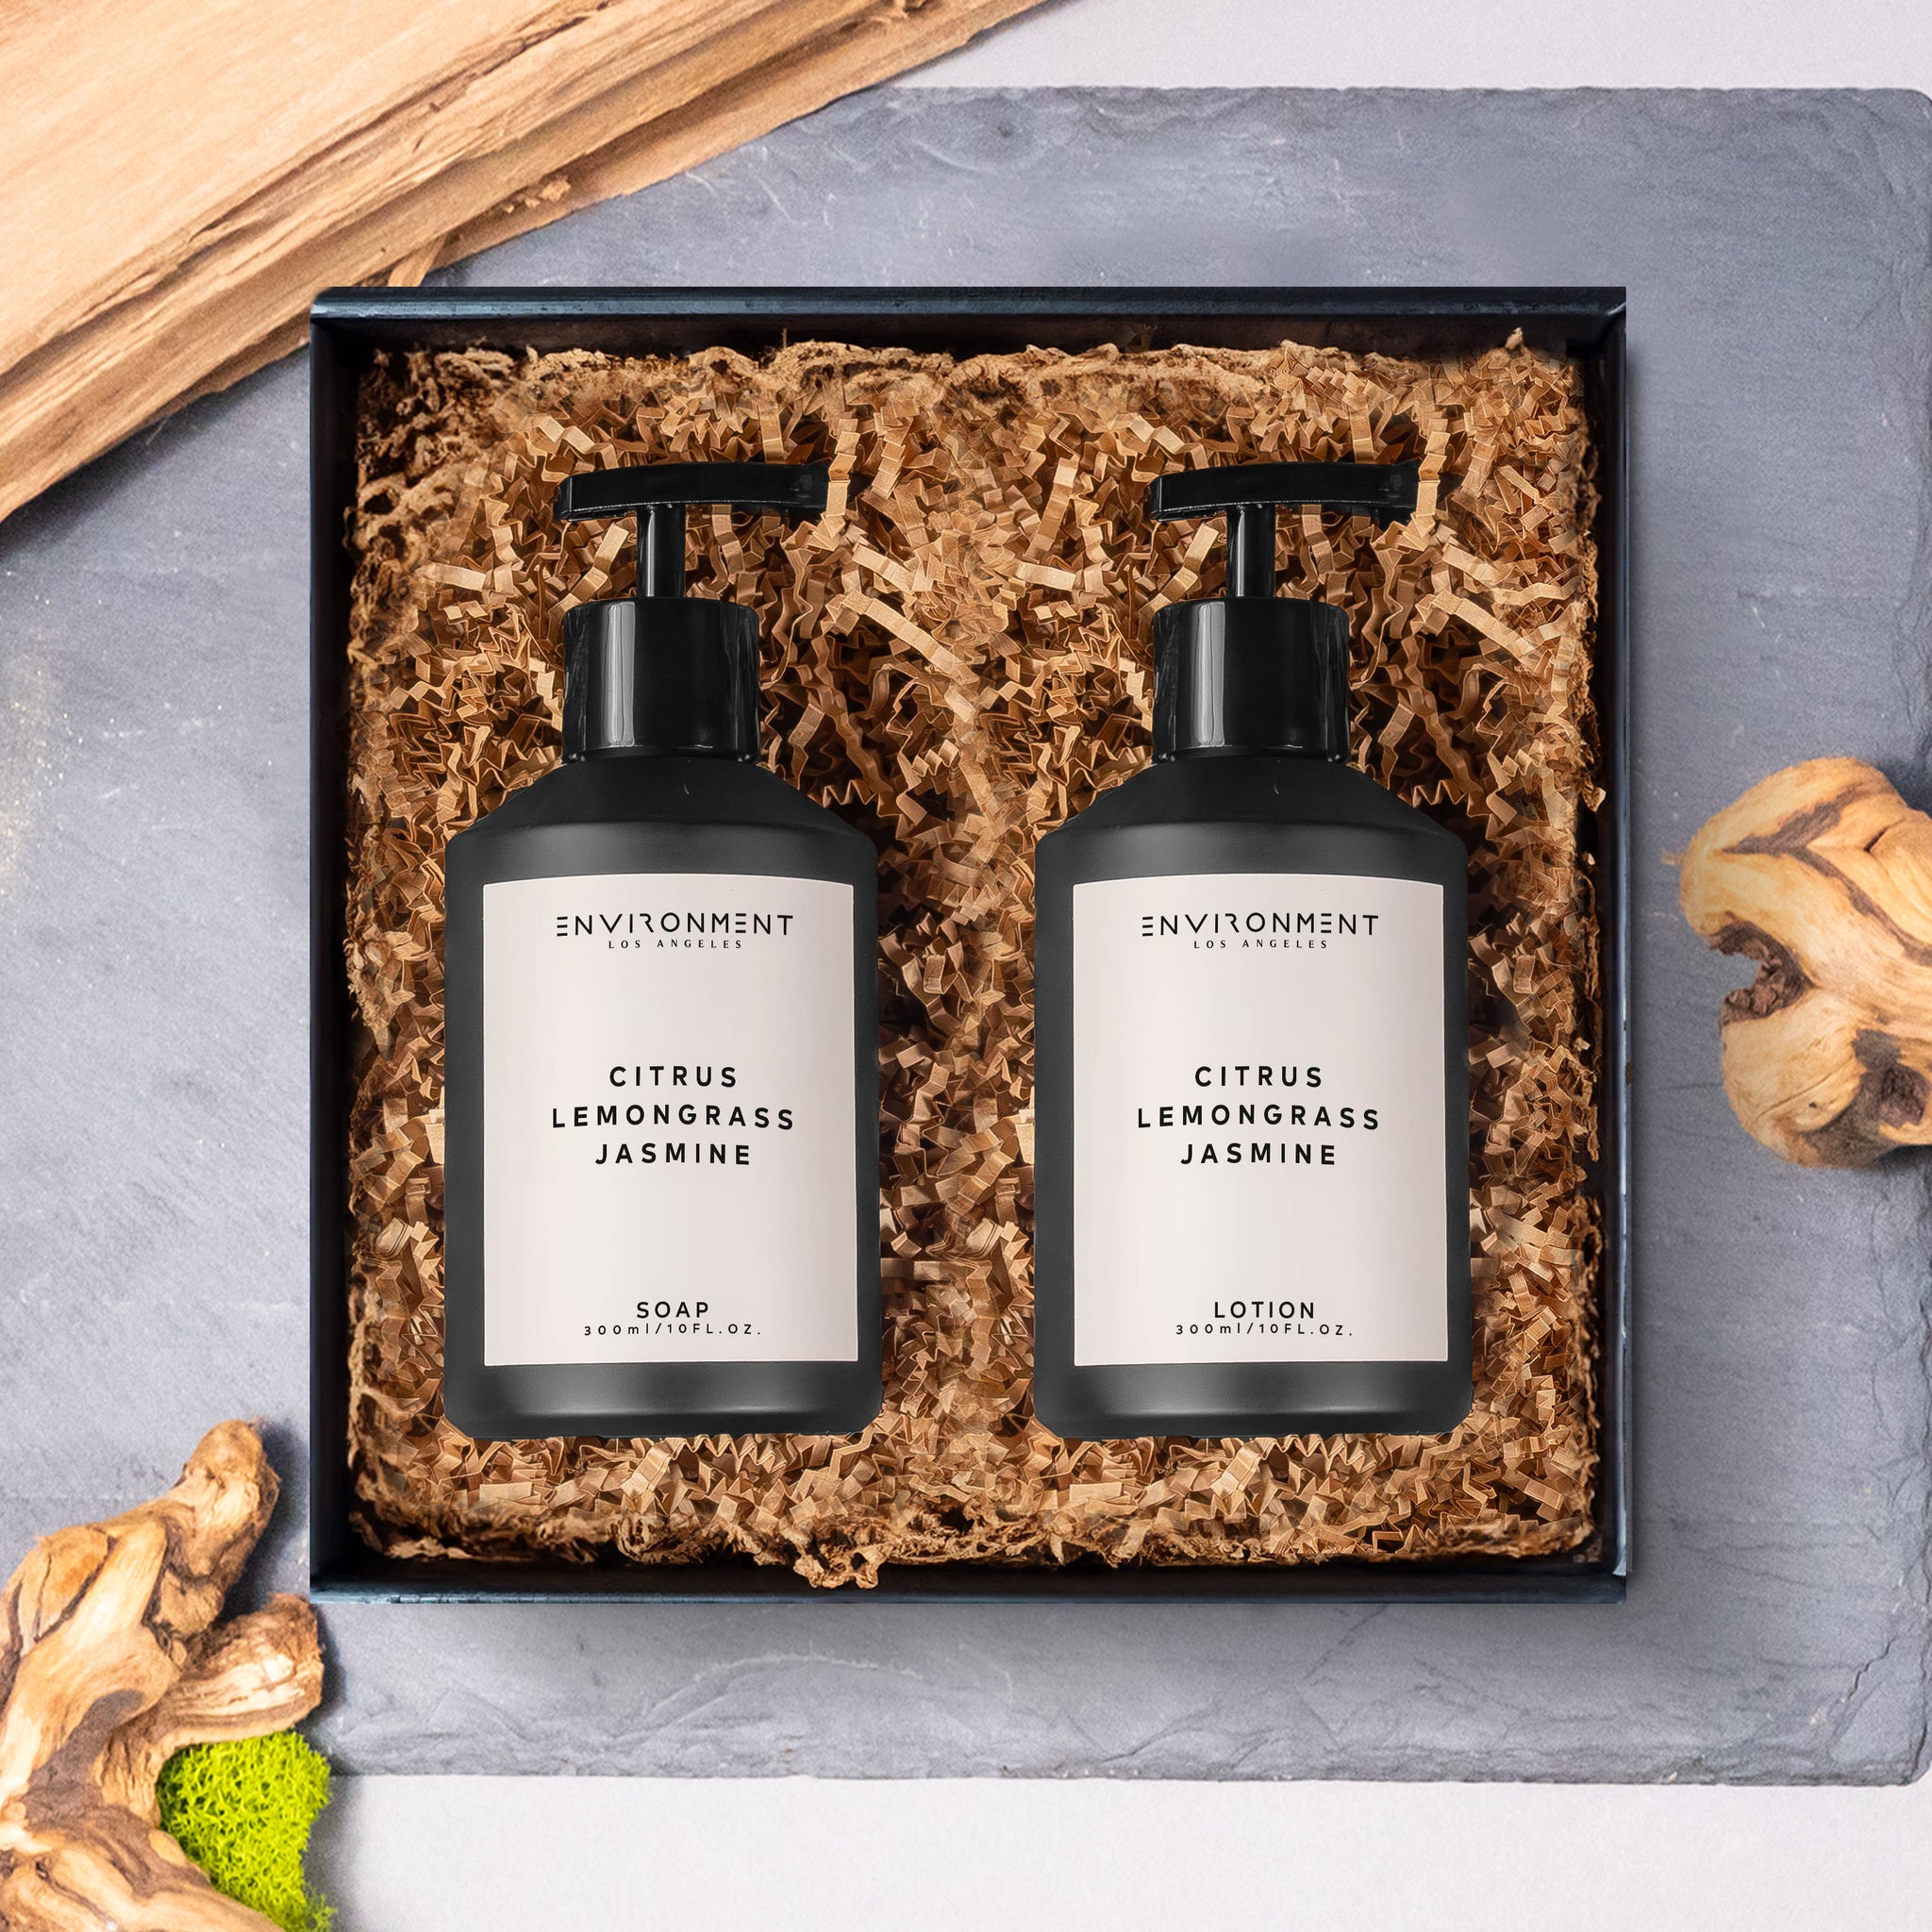 Citrus | Lemongrass | Jasmine 300ml Hand Soap and 300ml Lotion Gift Pack (Inspired by W Hotel®)